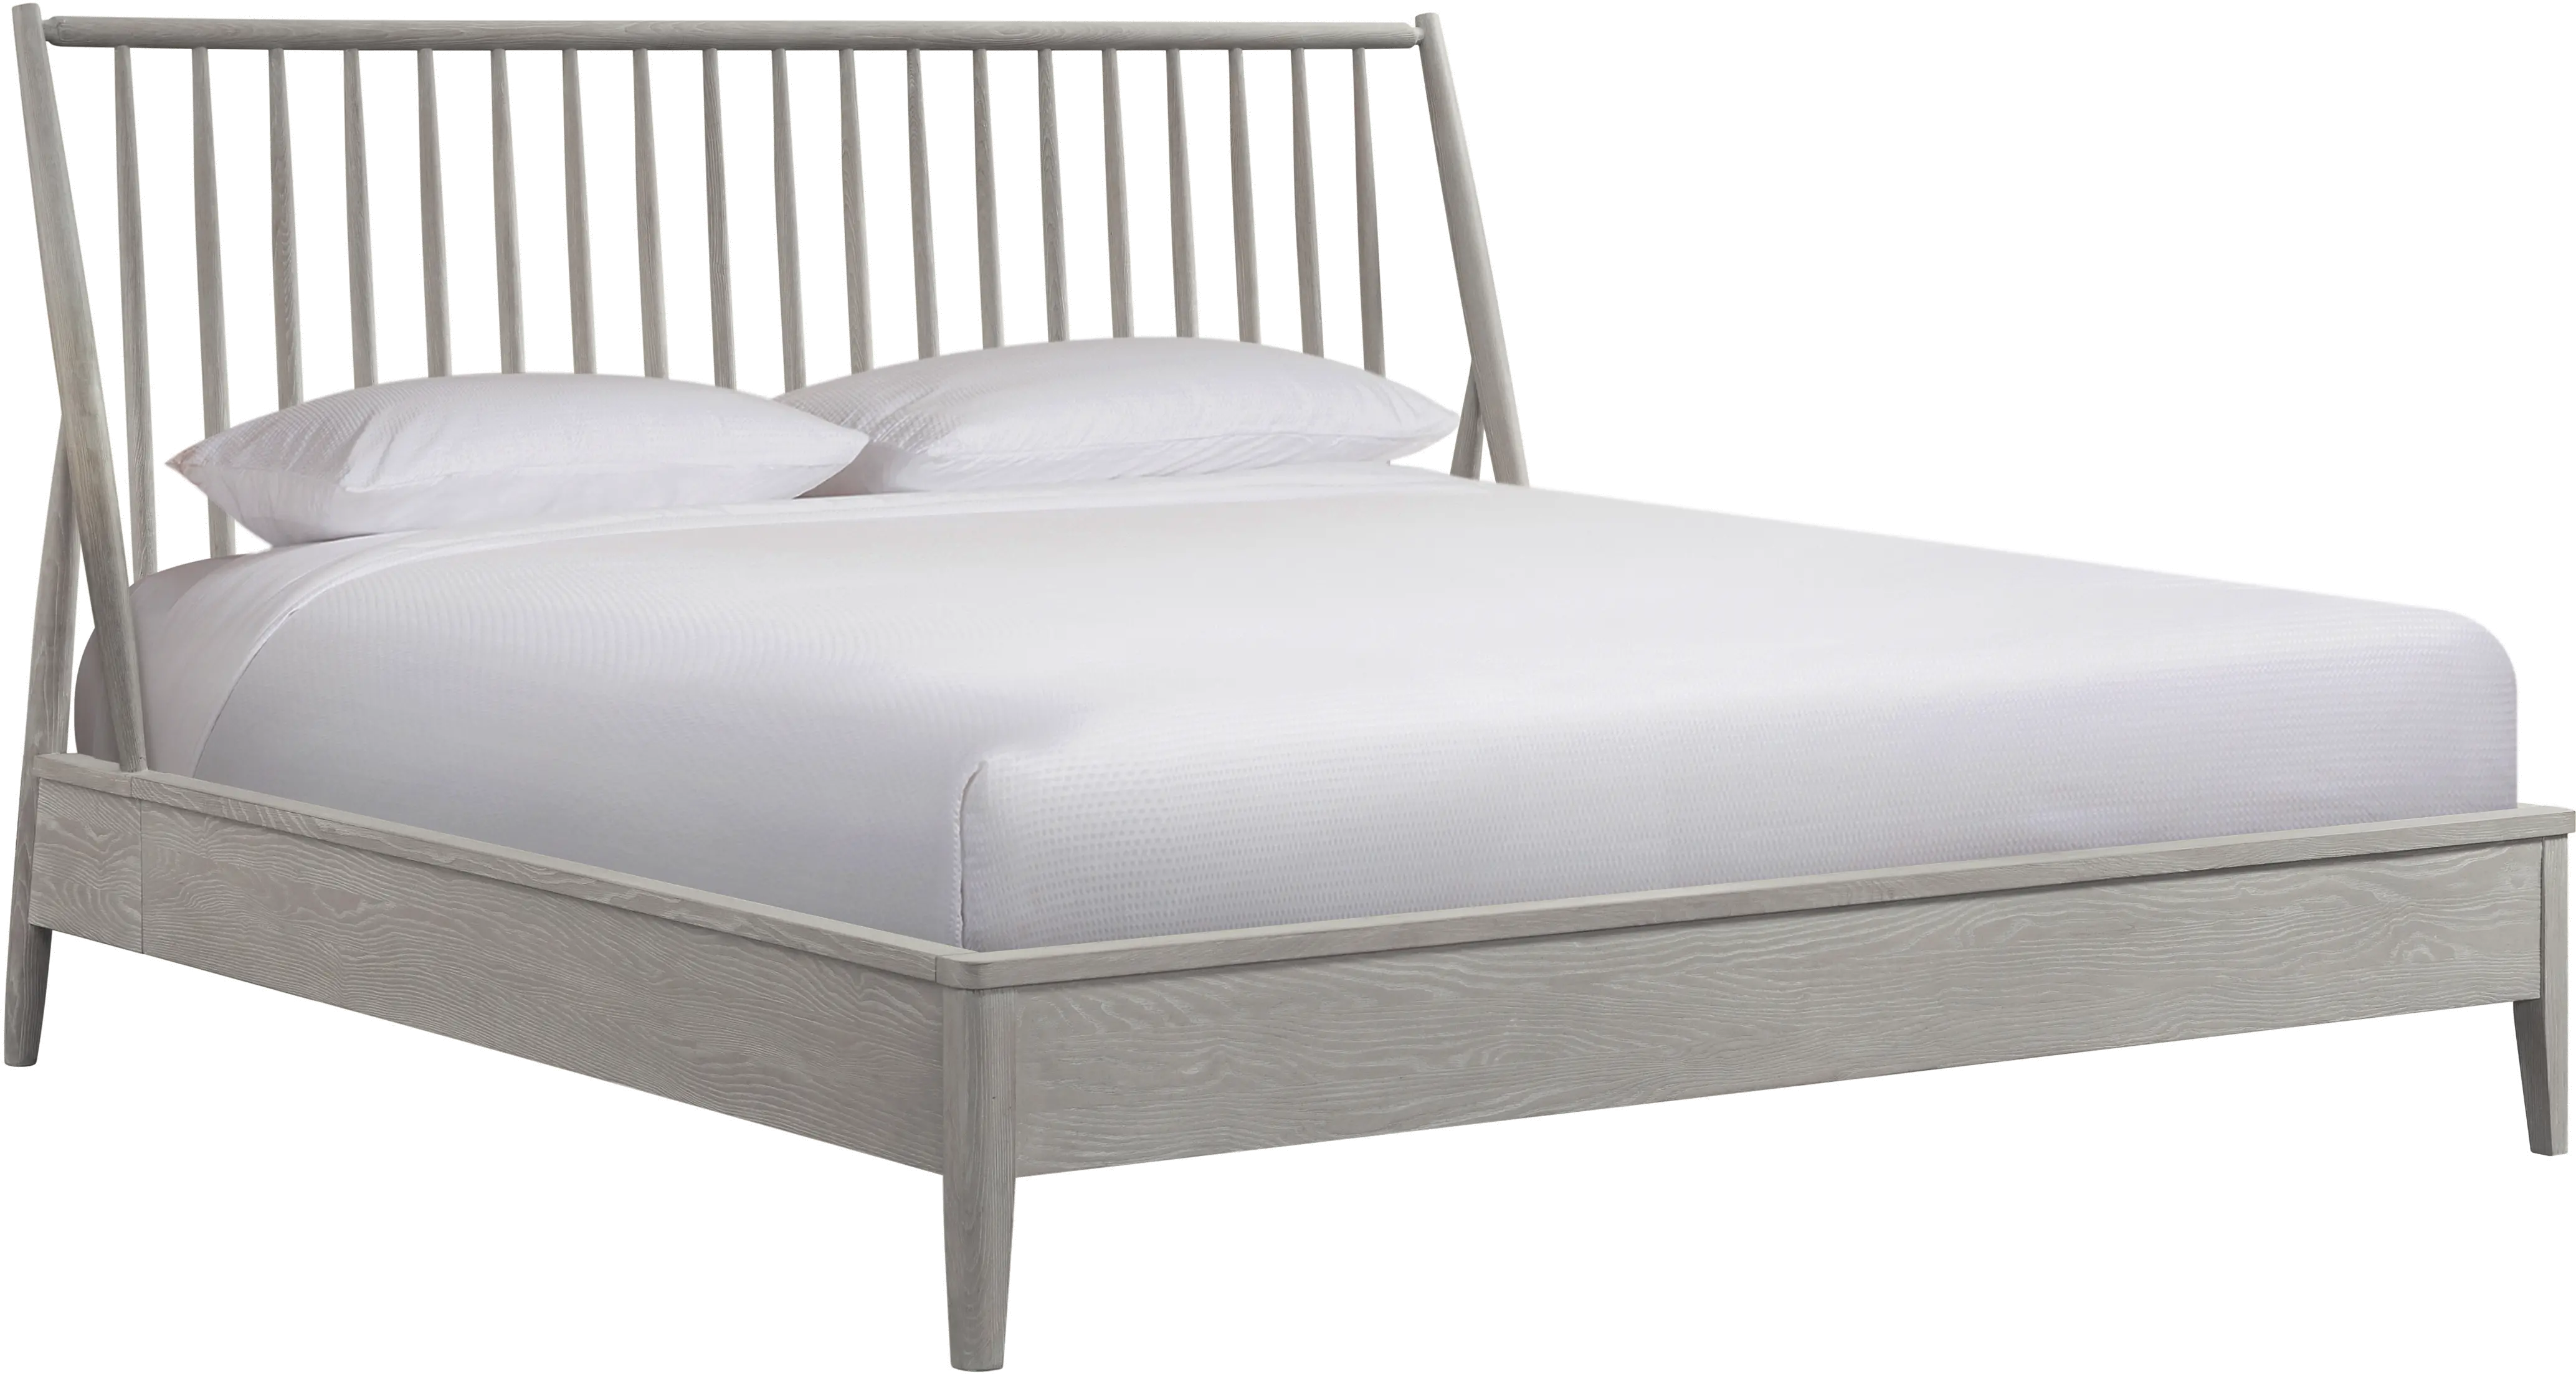 Bayside White King Bed